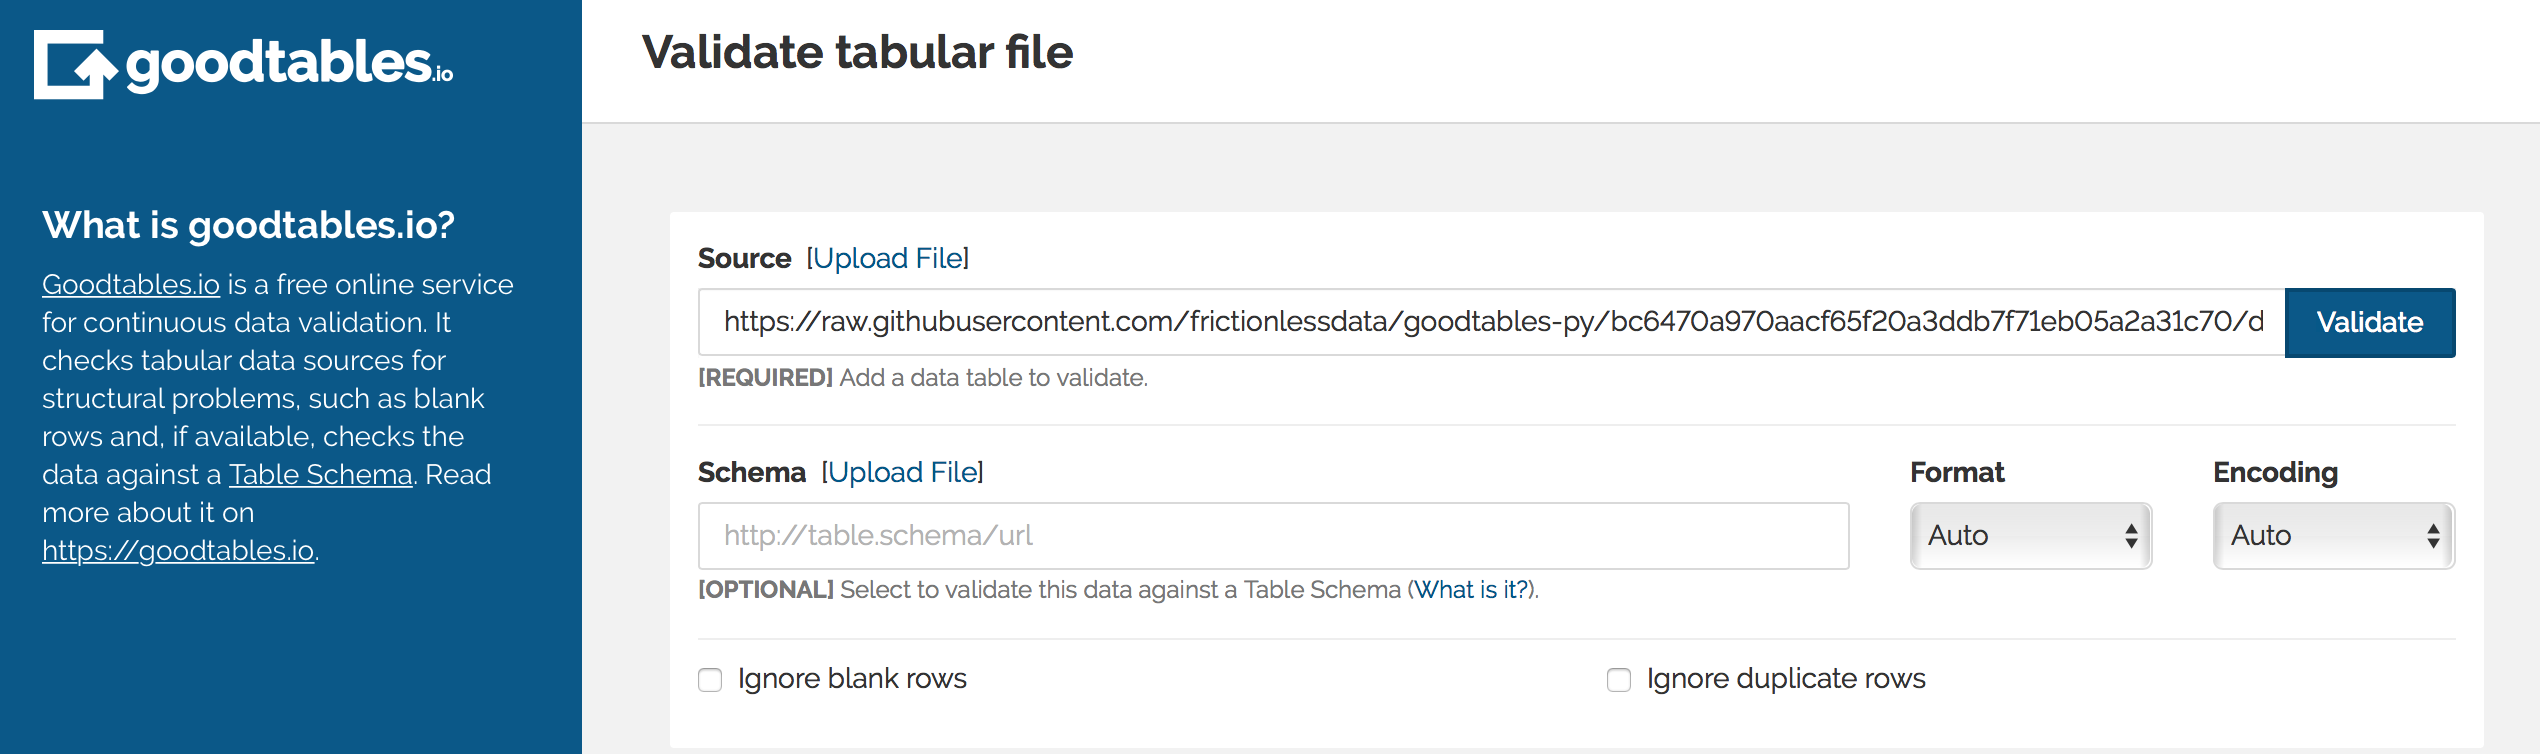 Add dataset link in the Source field, or select the Upload file option